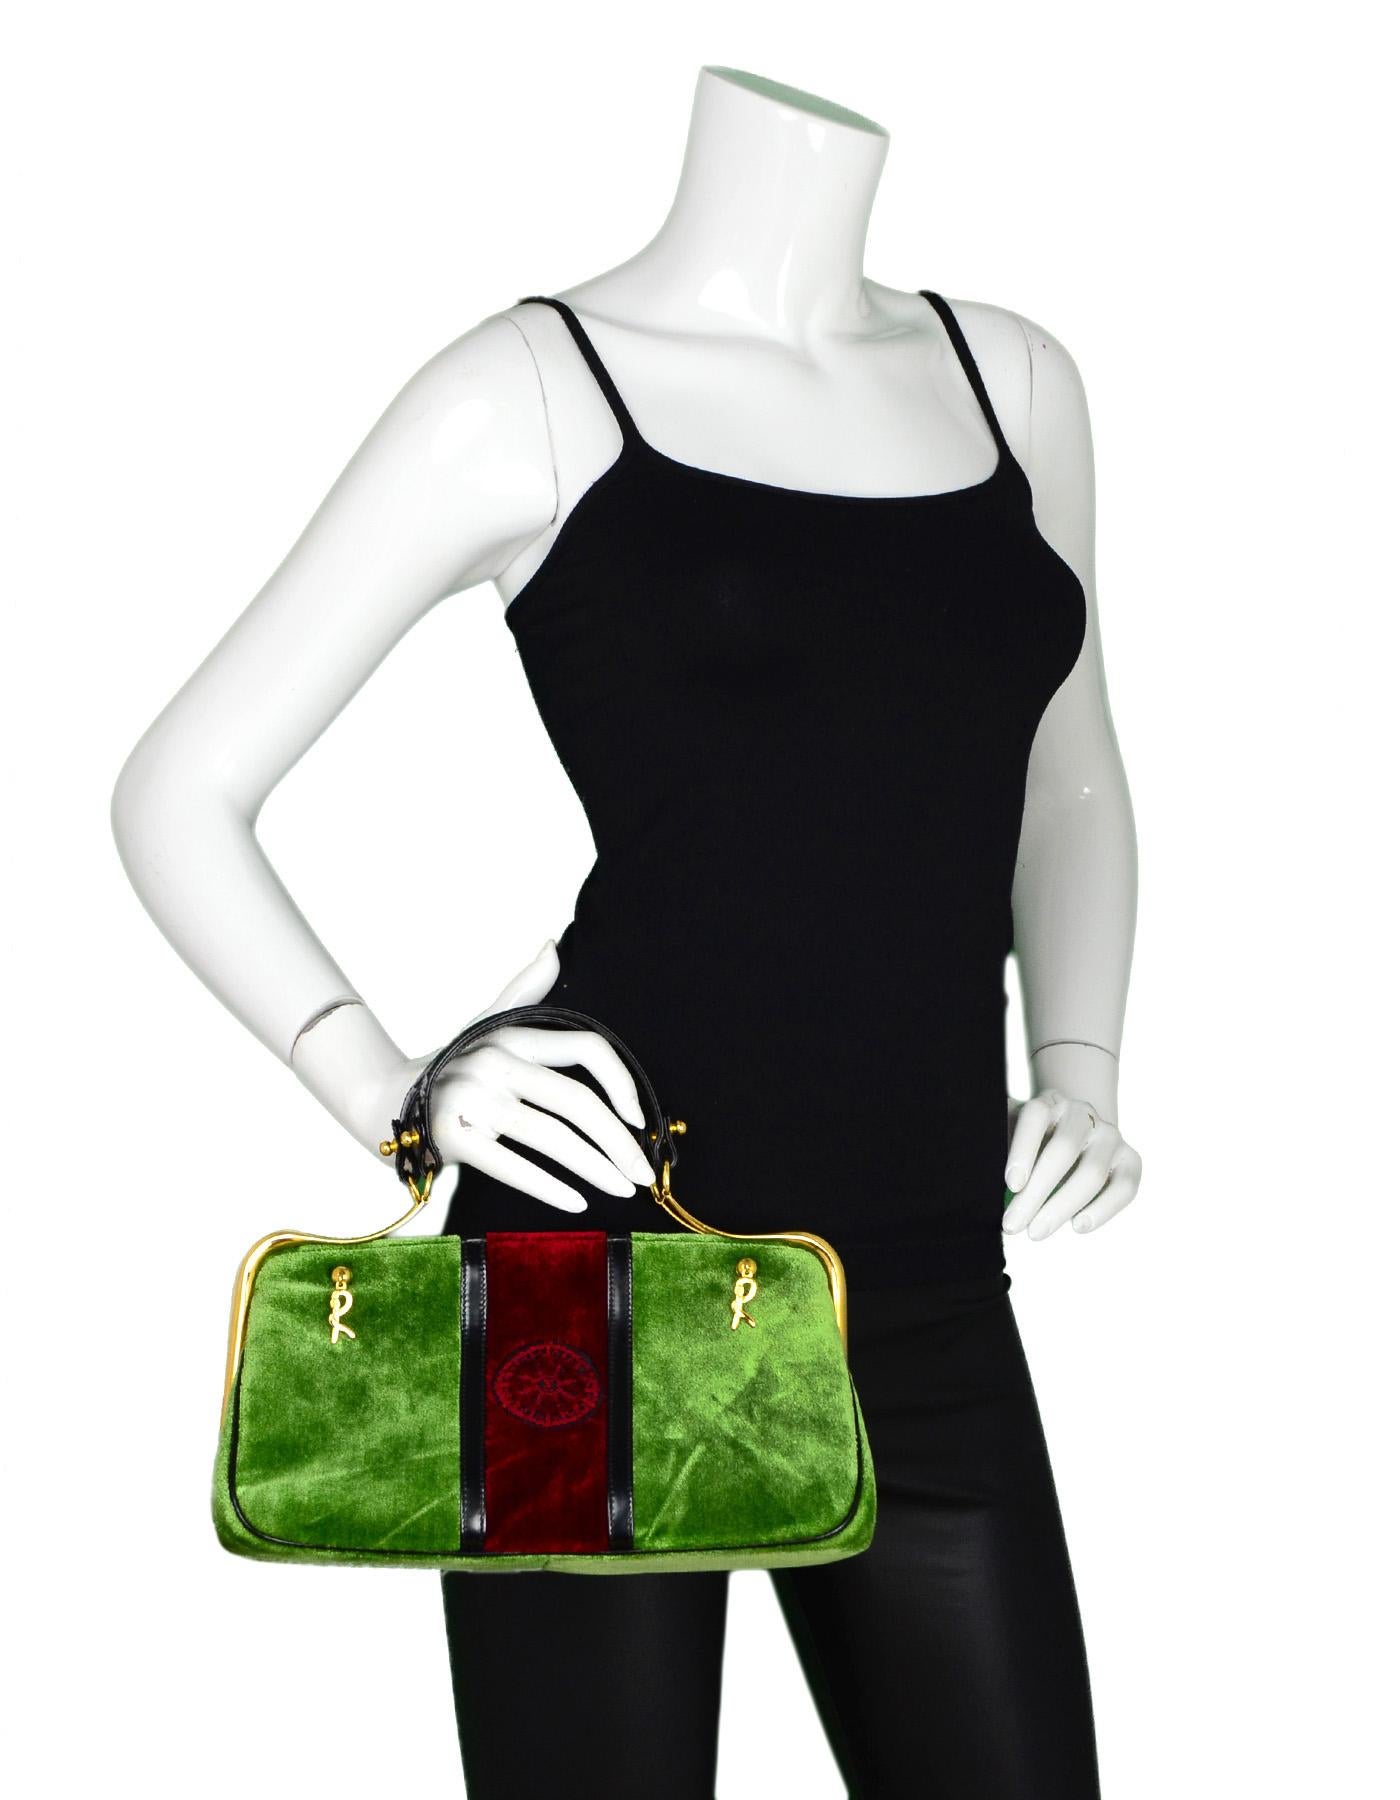 Roberta Di Camerino Vintage Green/Red Velvet Top Handle Bag

Made In: Italy
Color: Green and red
Hardware: Goldtone
Materials: Velvet, patent leather and metal 
Lining: Black leather 
Closure/Opening: Metal hinge closure 
Exterior Pockets: